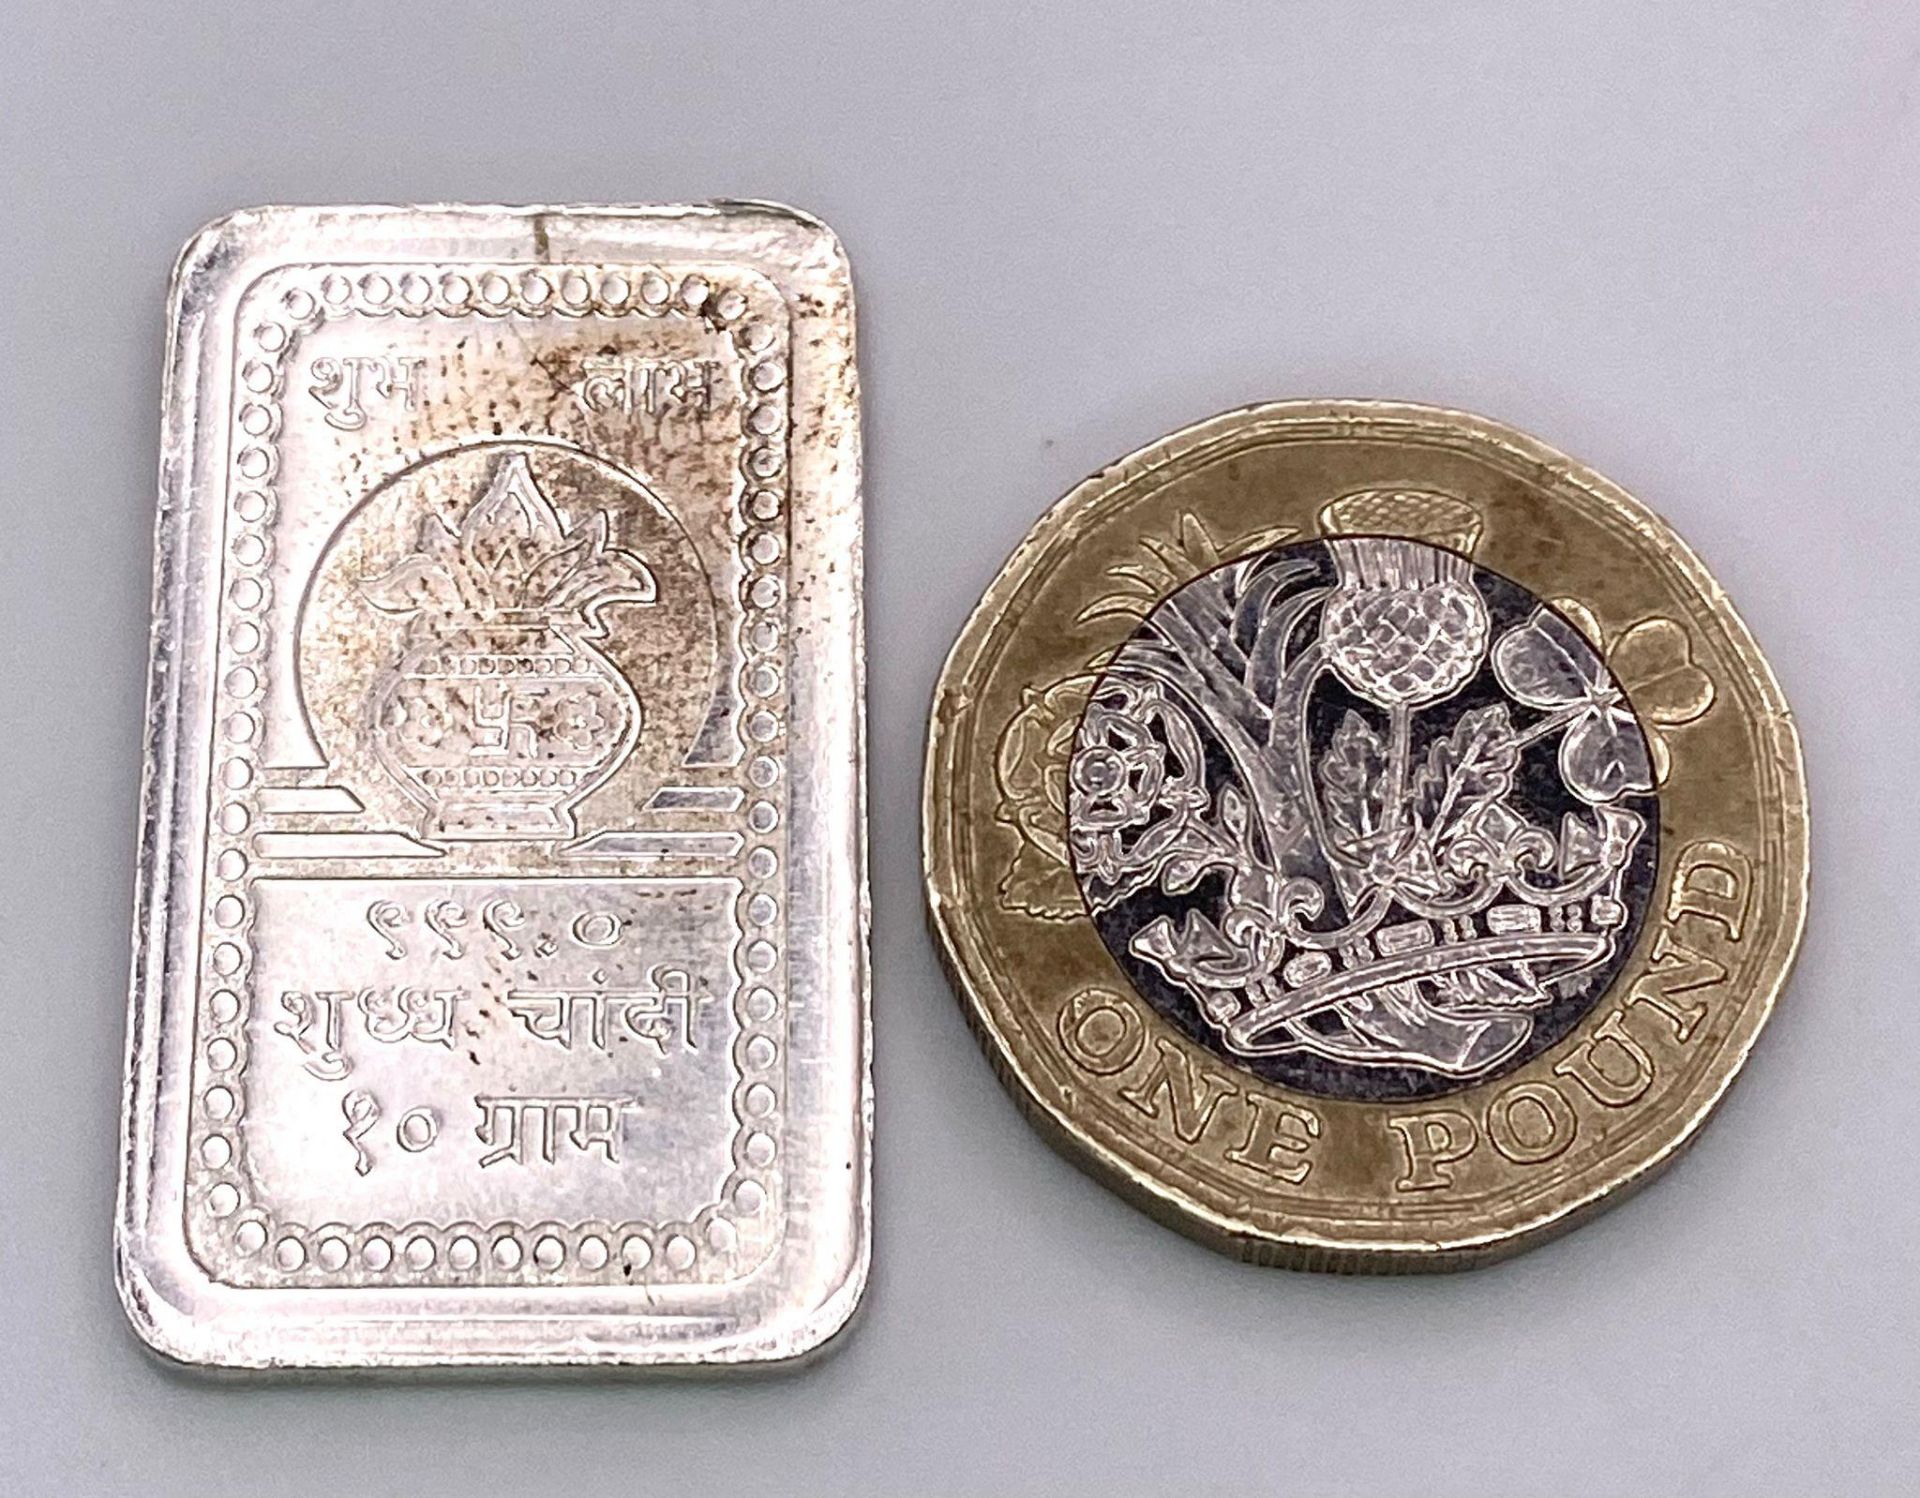 A 10G BAR OF FINE SILVER 999.0 Ref: SC 7010 - Image 3 of 3